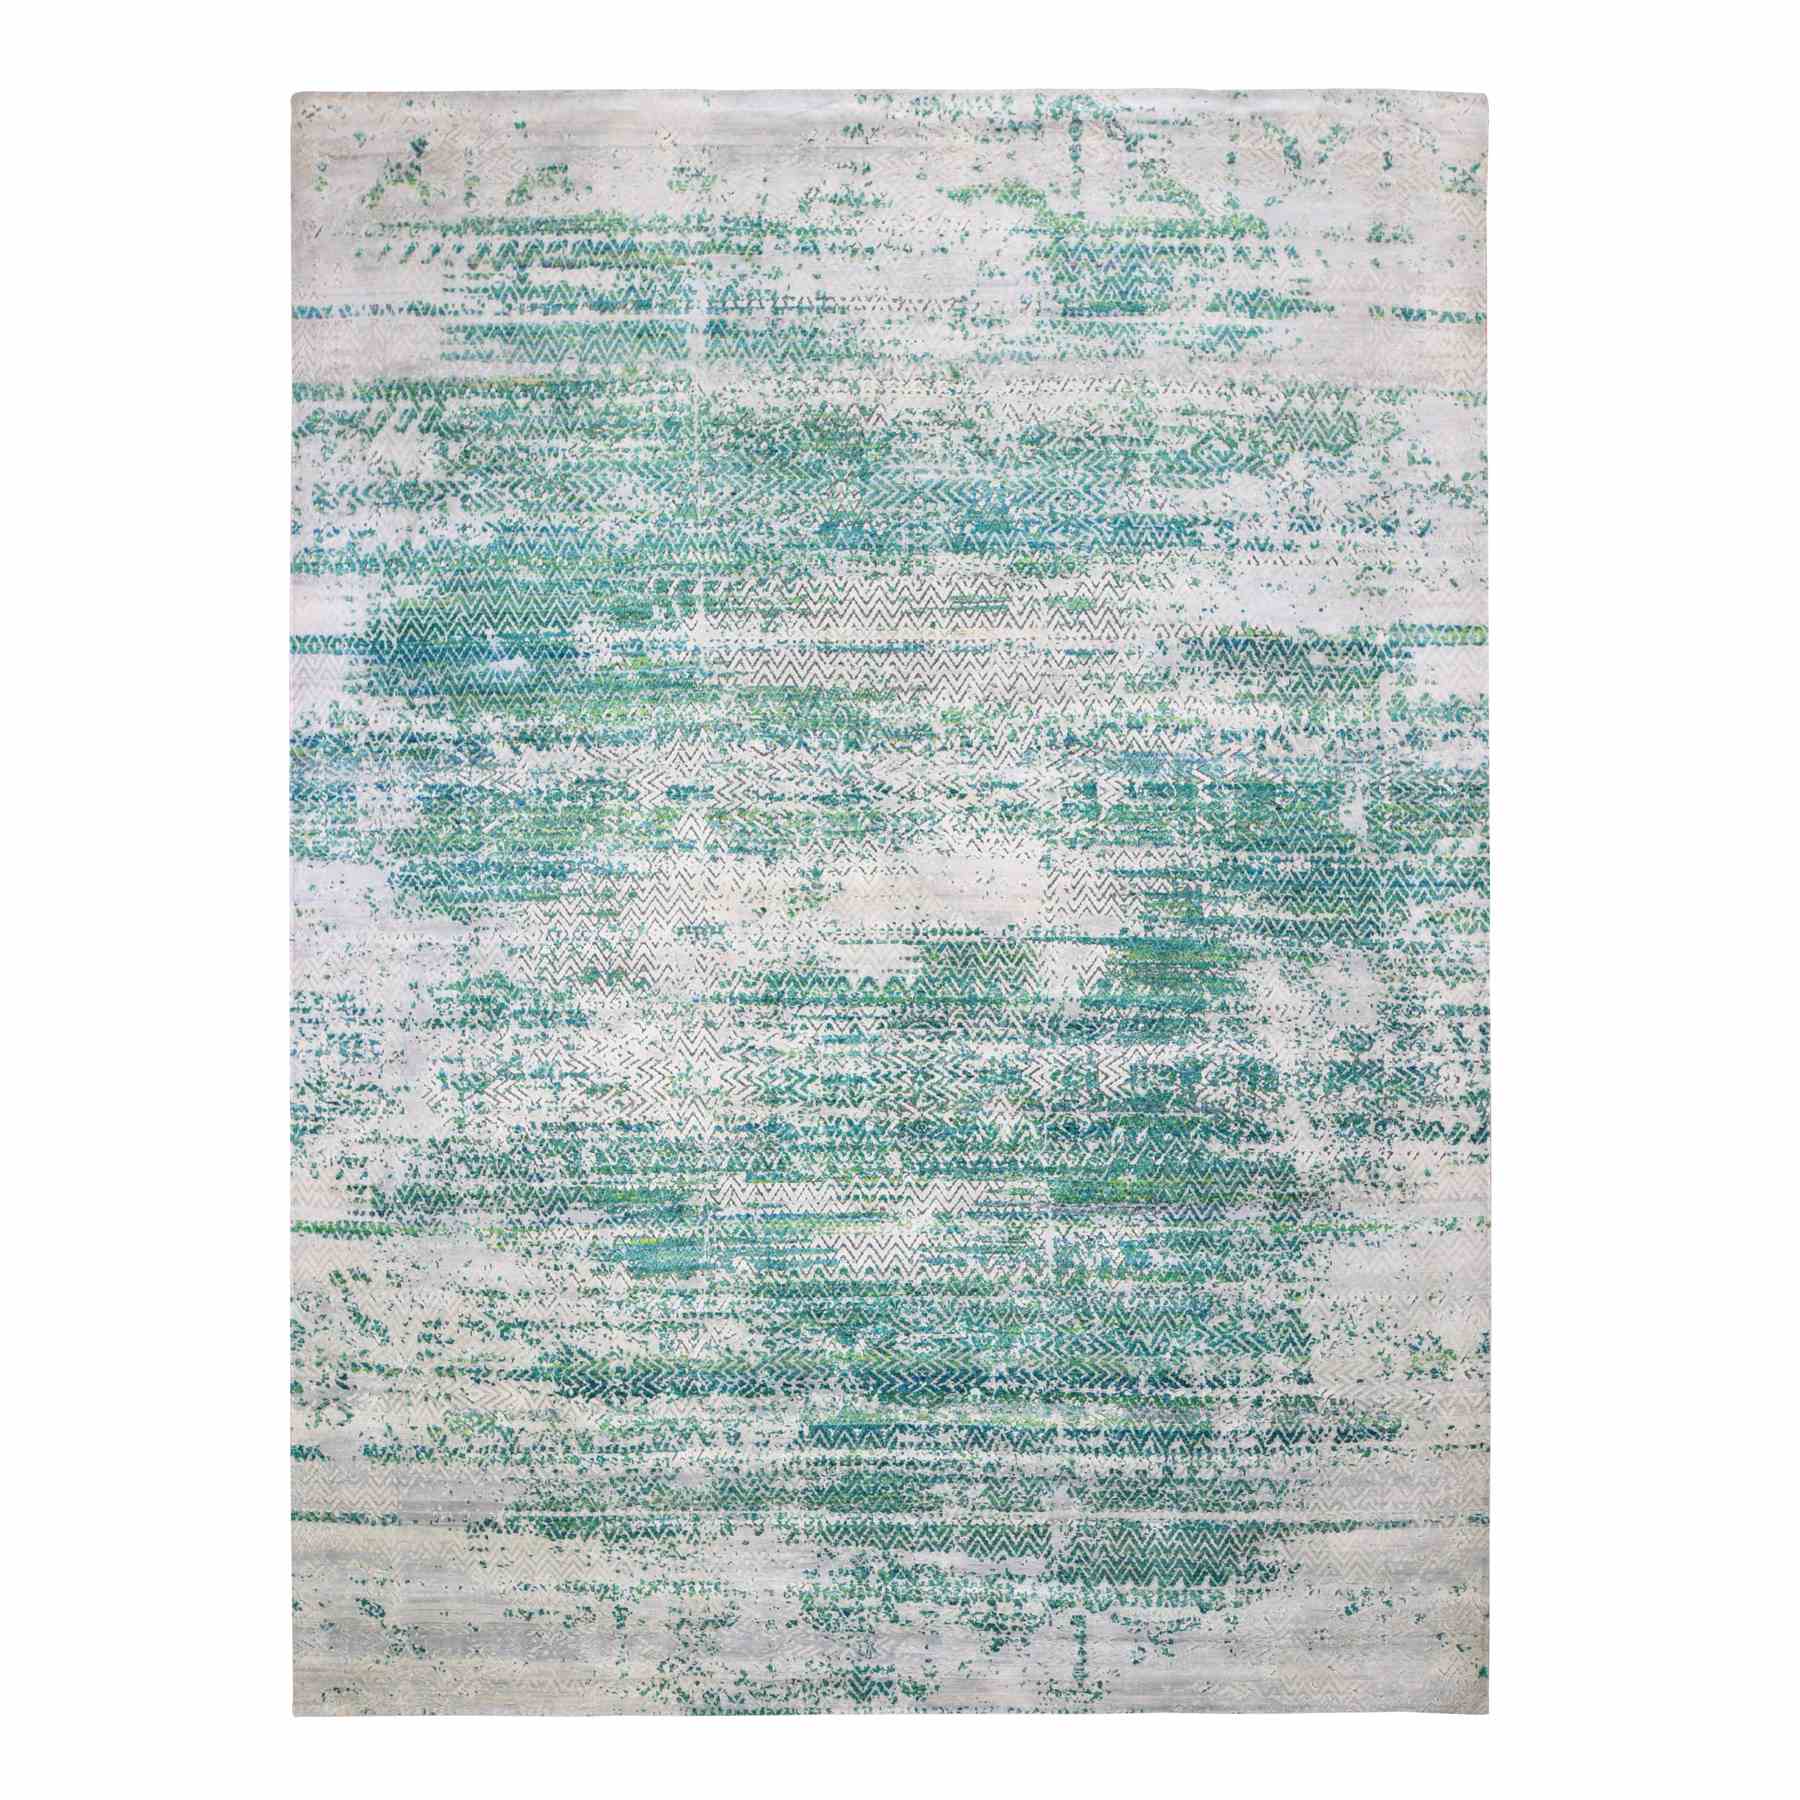 Wool-and-Silk-Hand-Knotted-Rug-296120